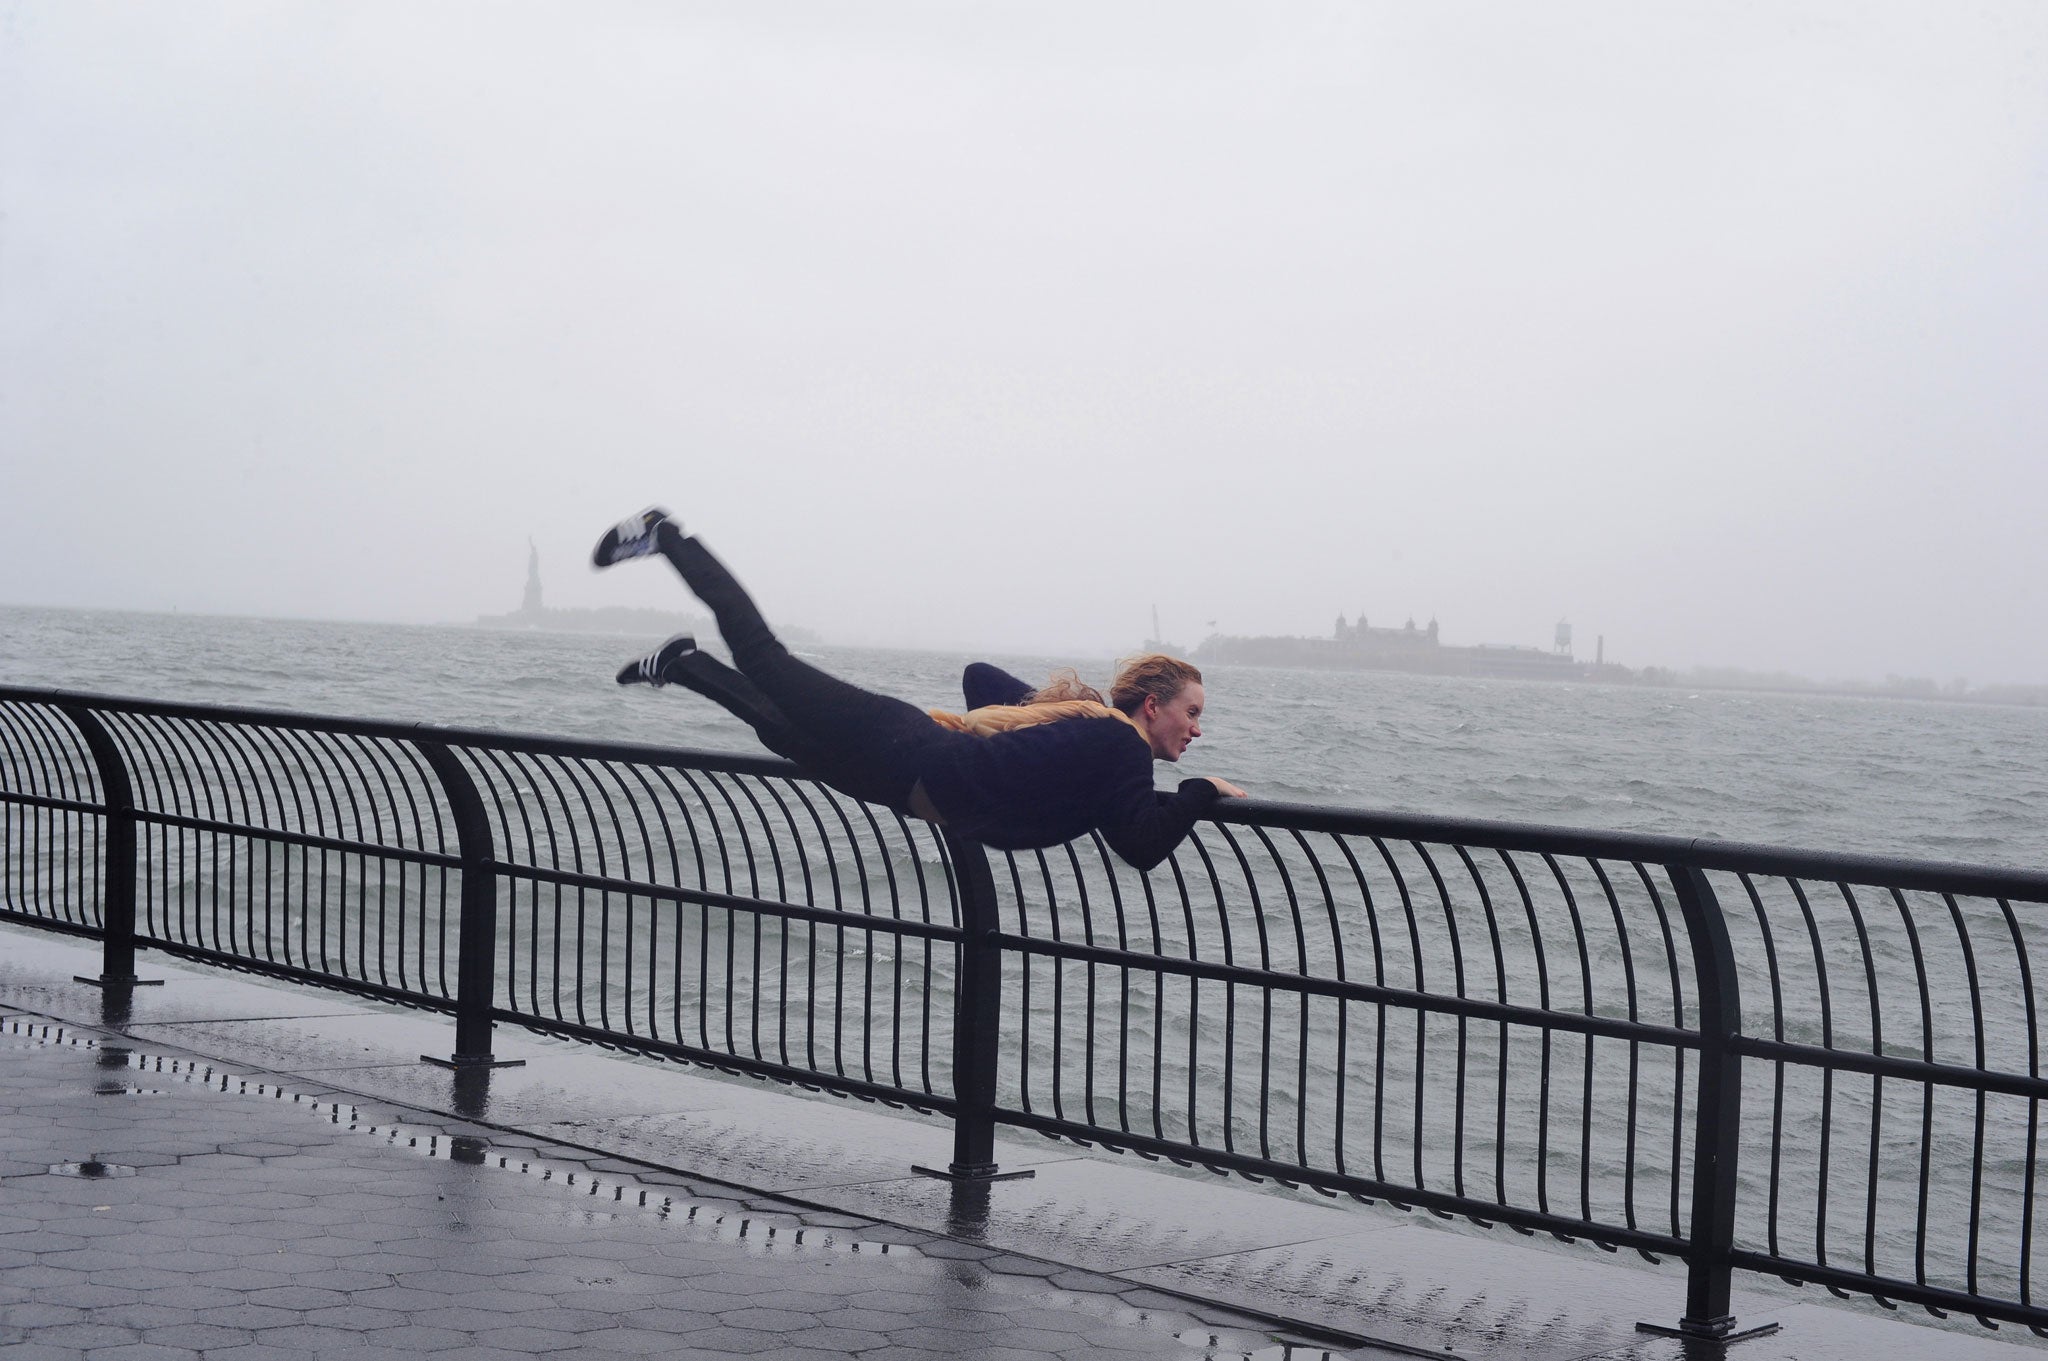 Cervera photographed a woman hanging off a railing in New York during Hurricane Sandy